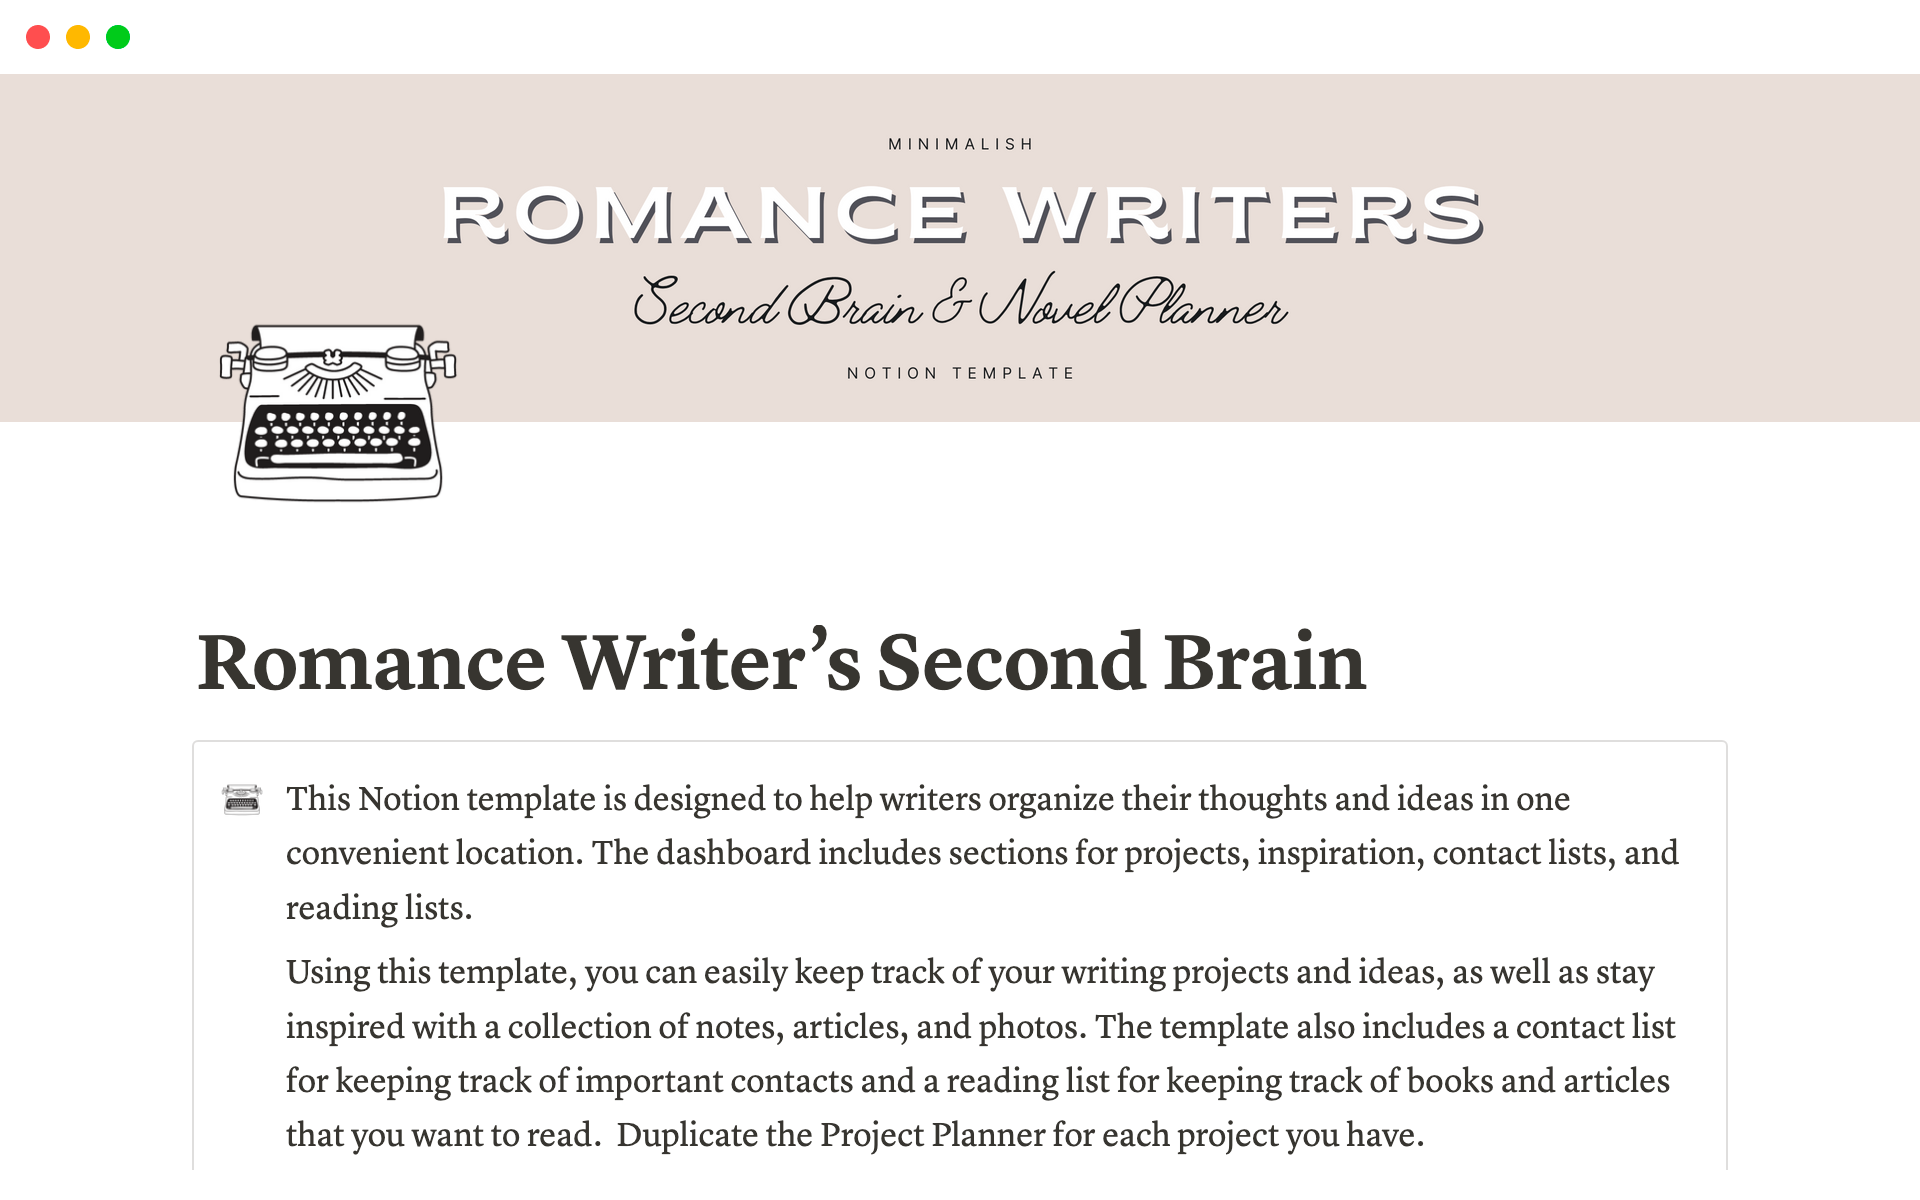 Second Brain for Romance Writers including a full novel planner with outlining hub with prompts to plot your novel, a revision hub, editing hub, and full character development template.